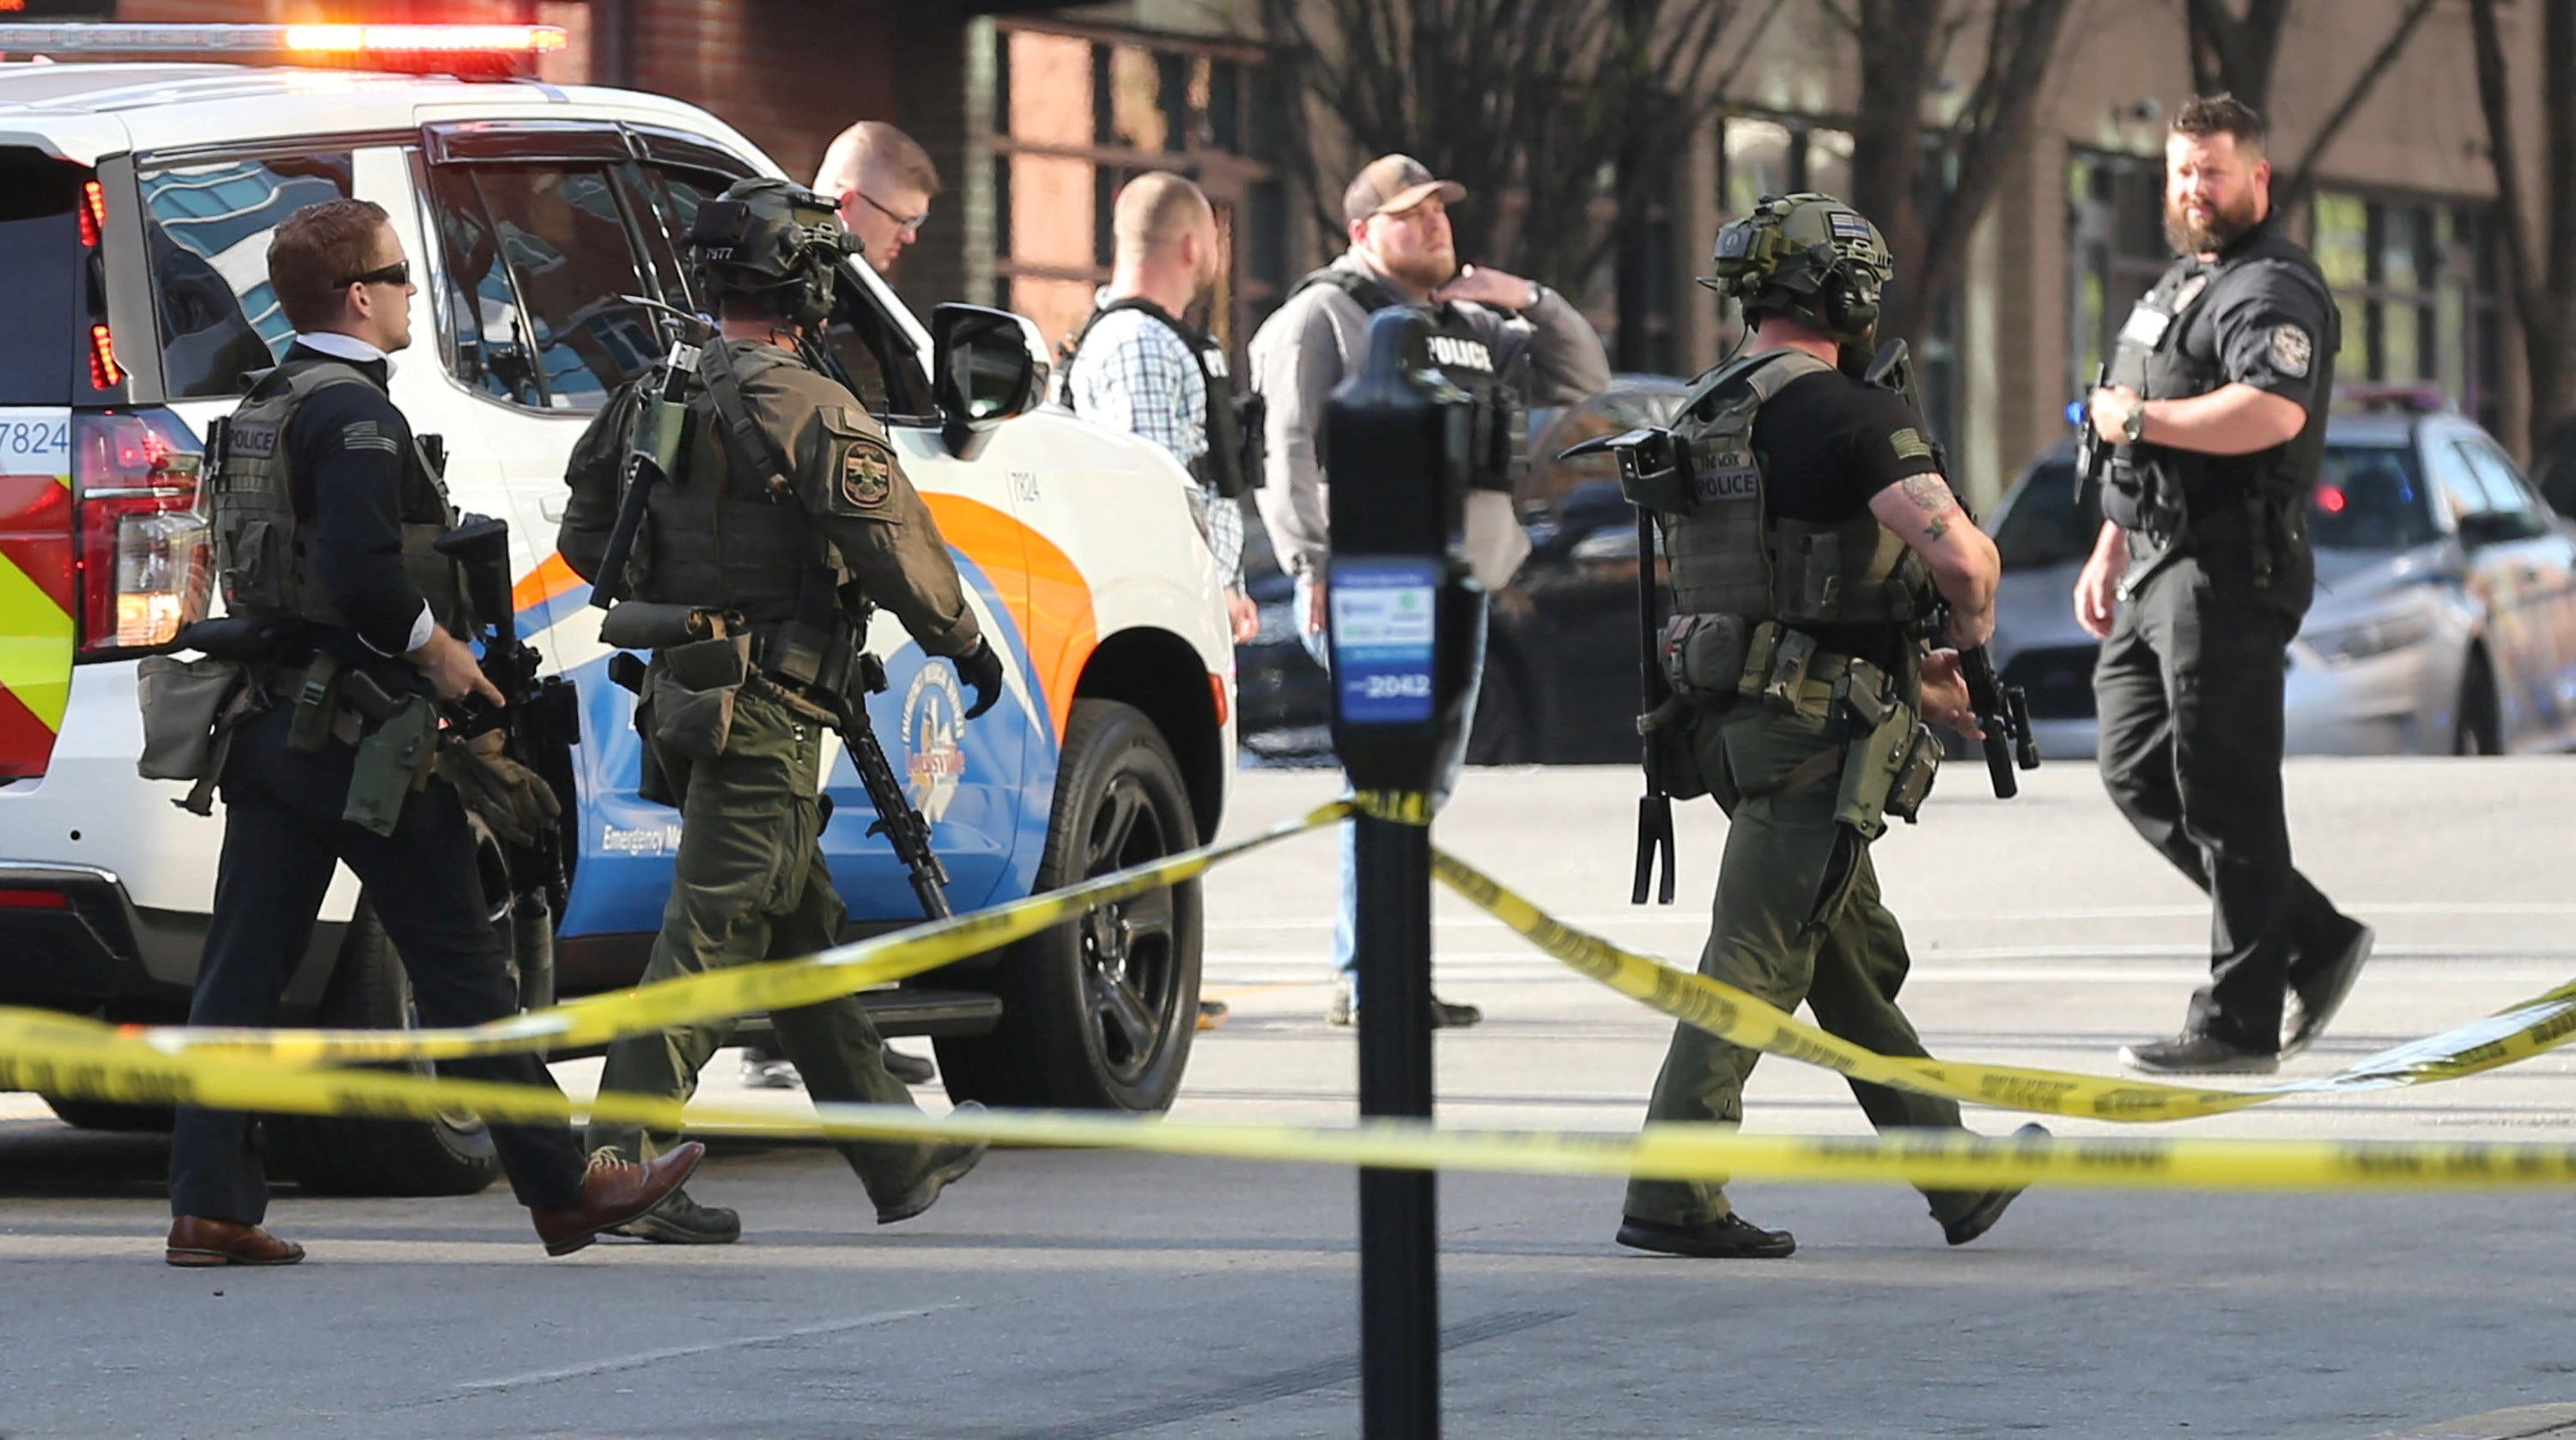 Police deploy at the scene of a mass shooting near Slugger Field baseball stadium in downtown Louisville 